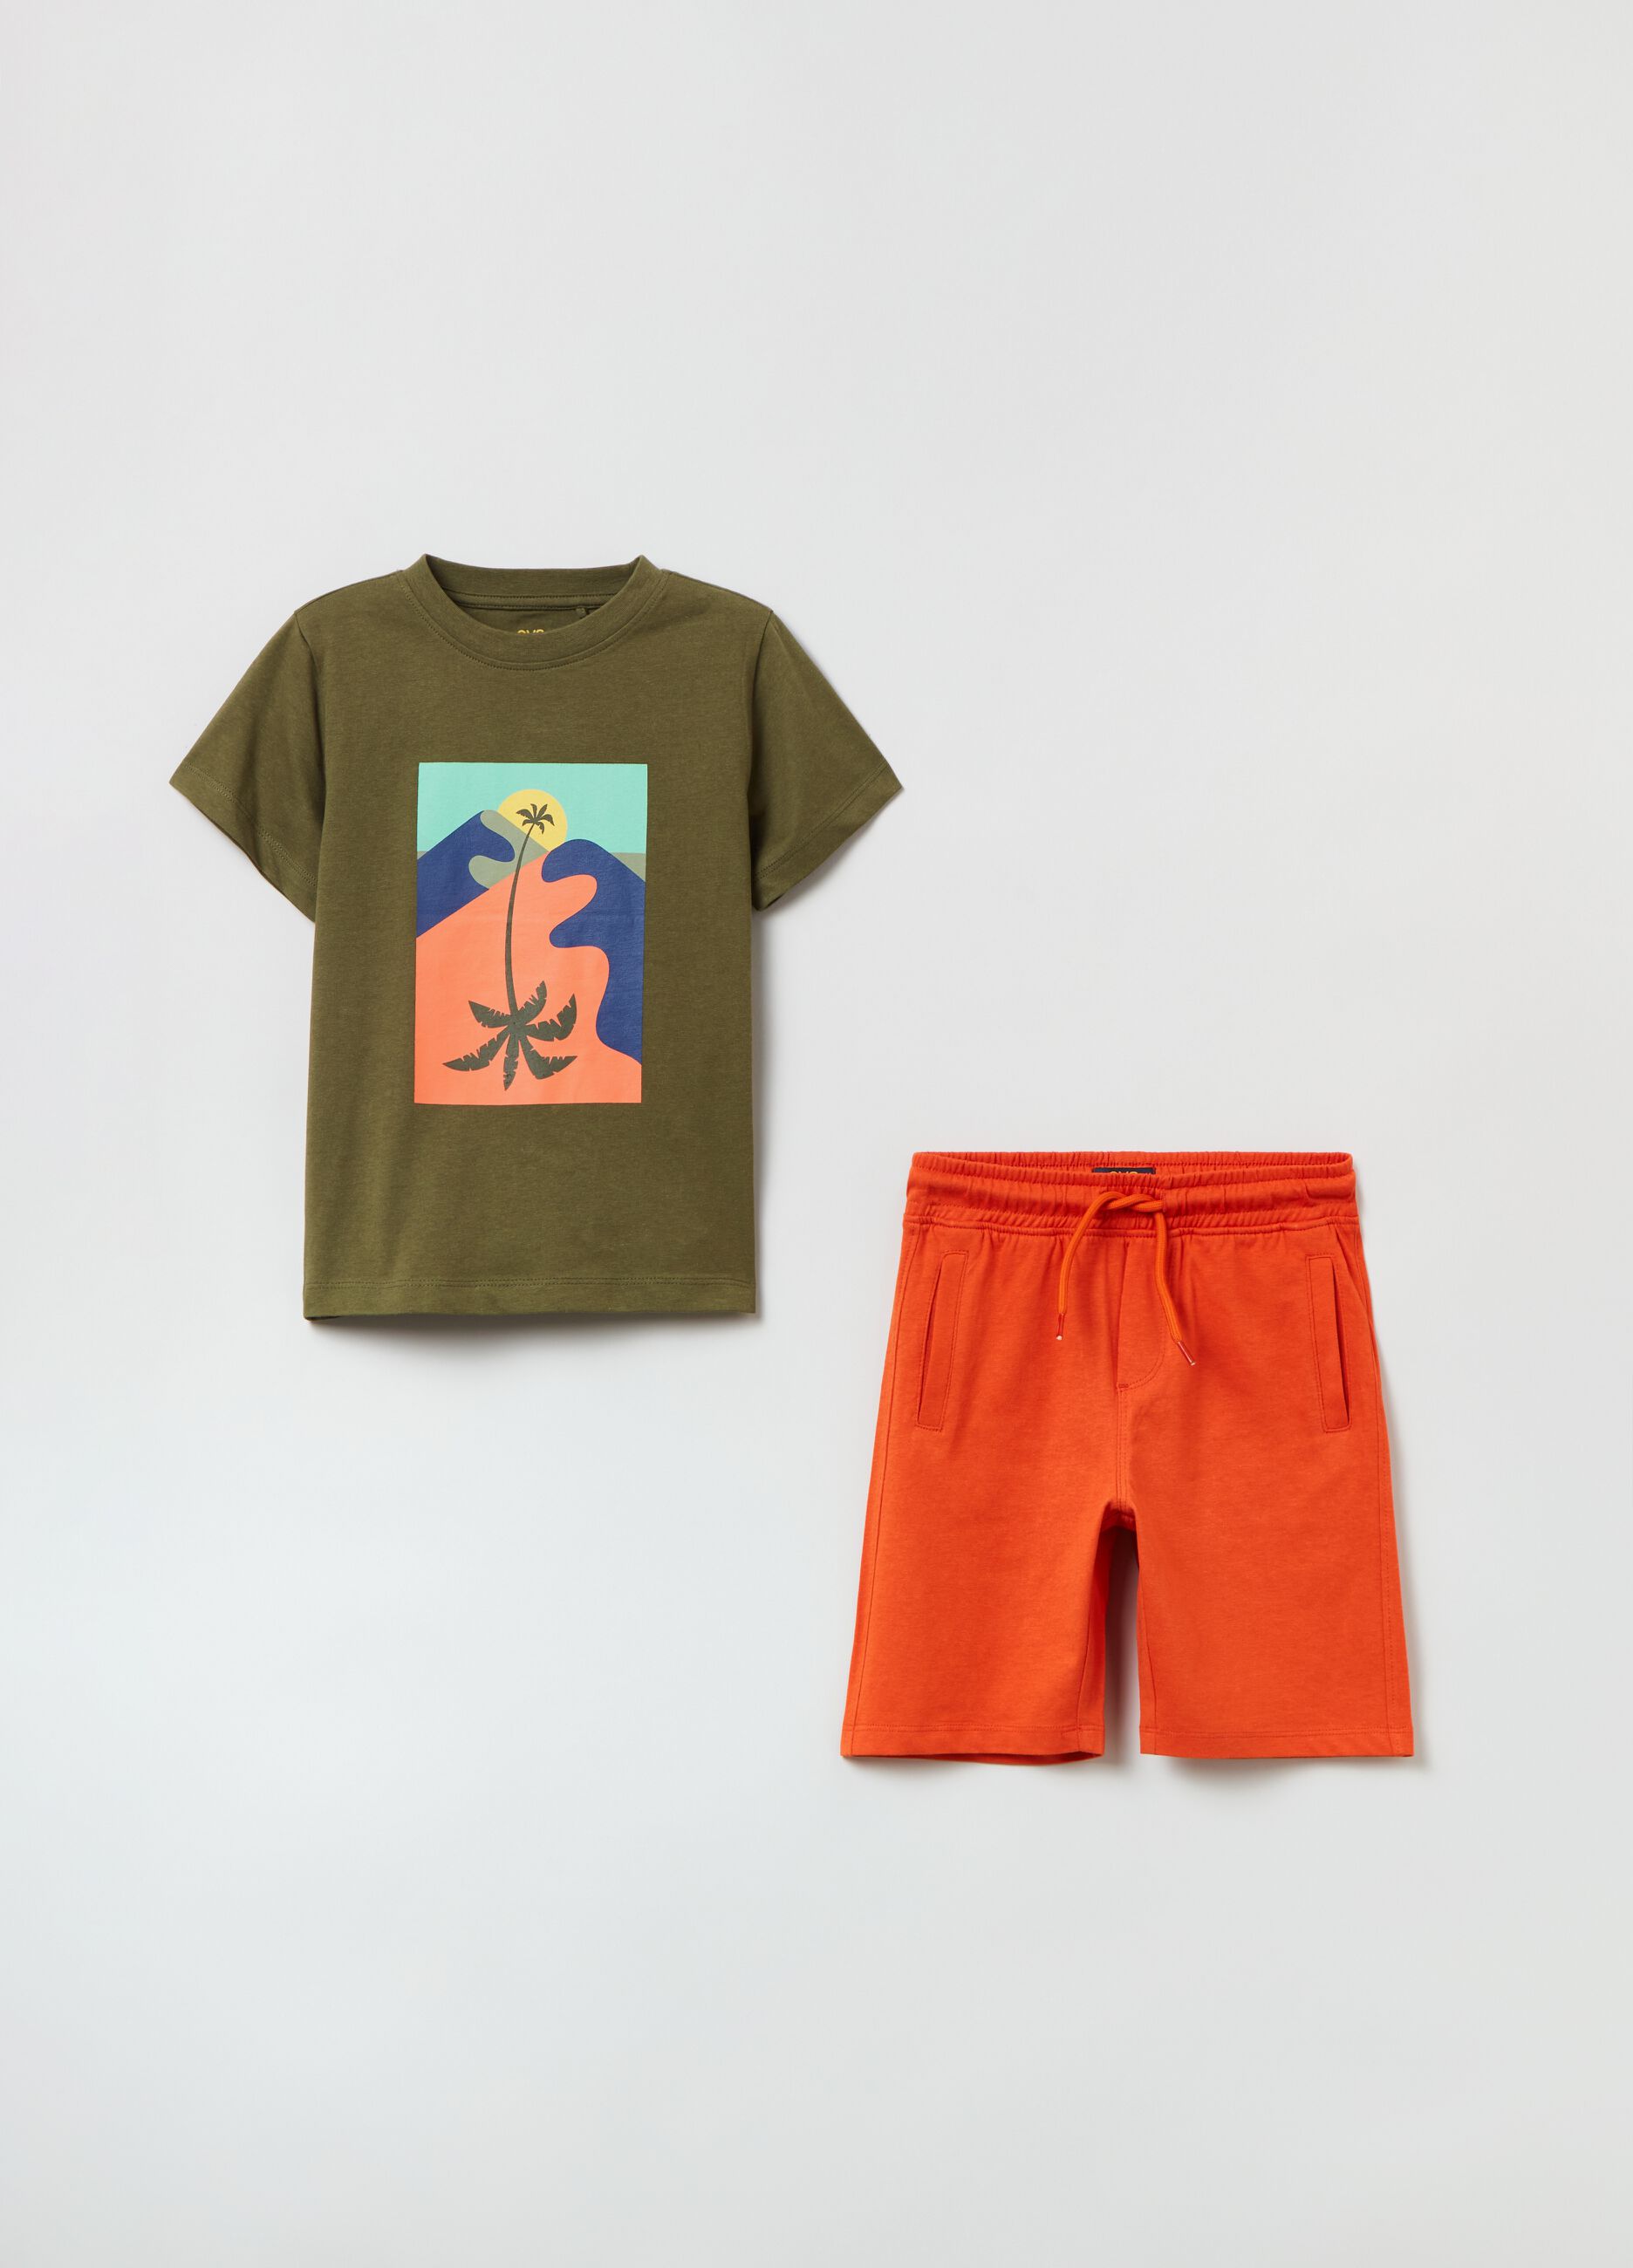 Jogging set consisting of T-shirt and shorts in cotton